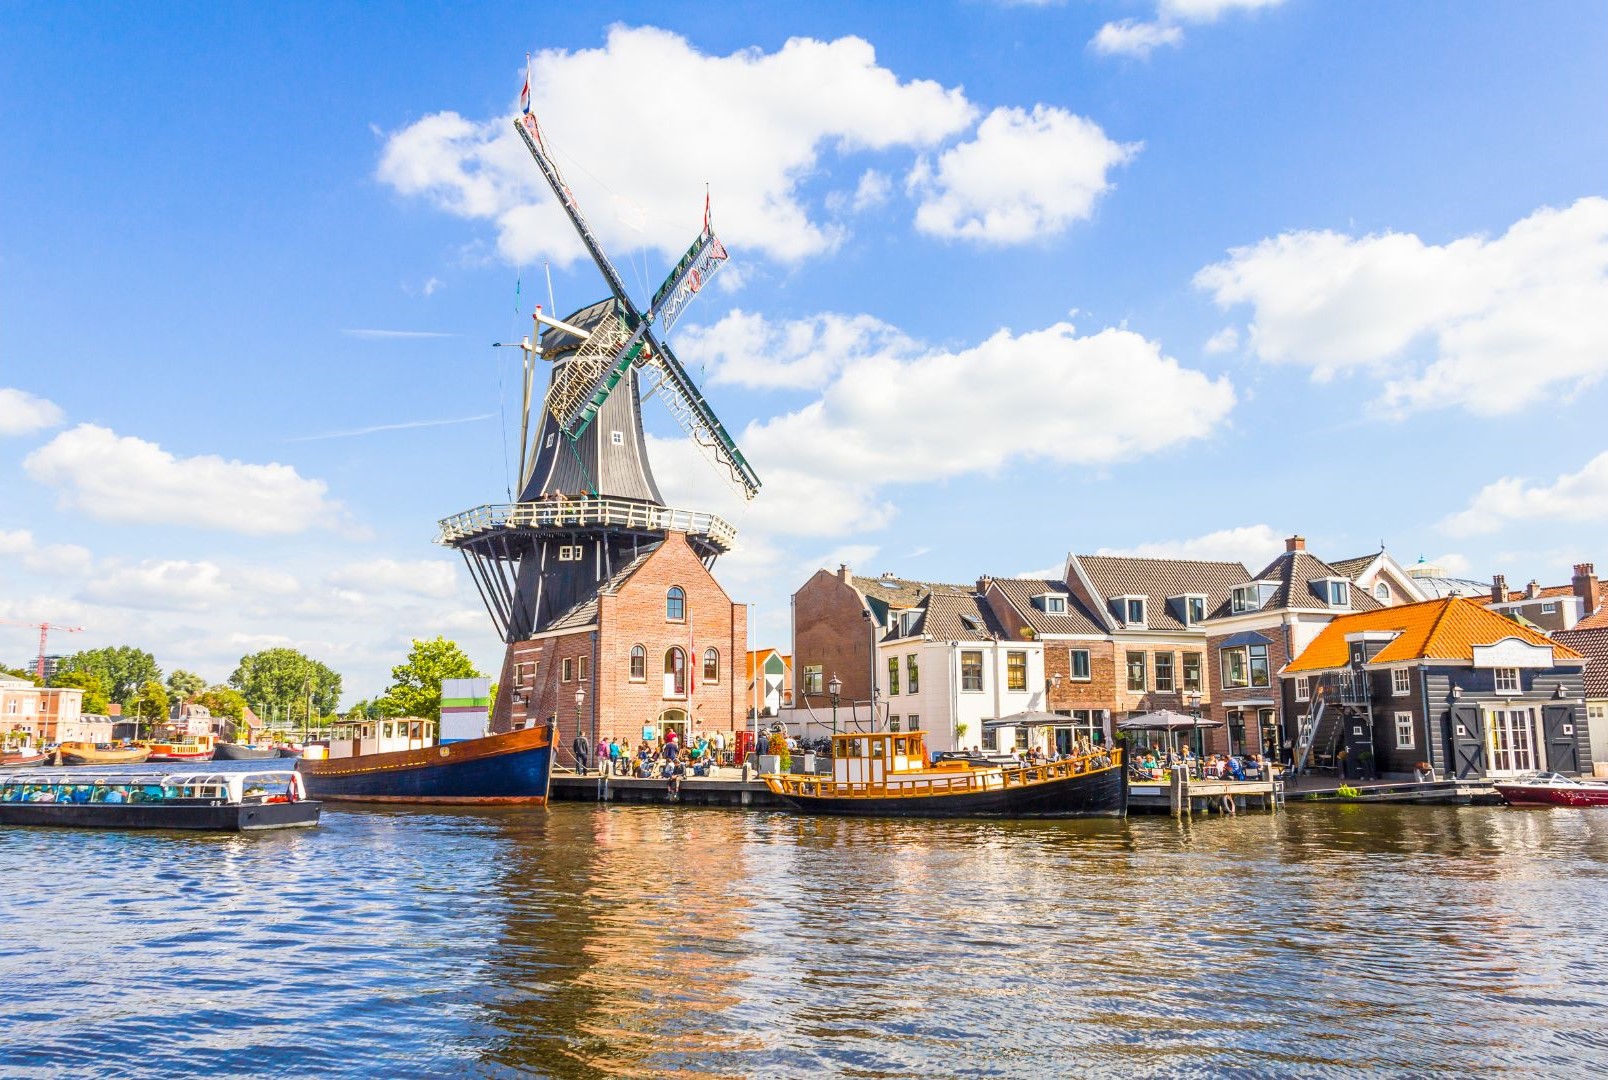 The charm of Netherland Cities.